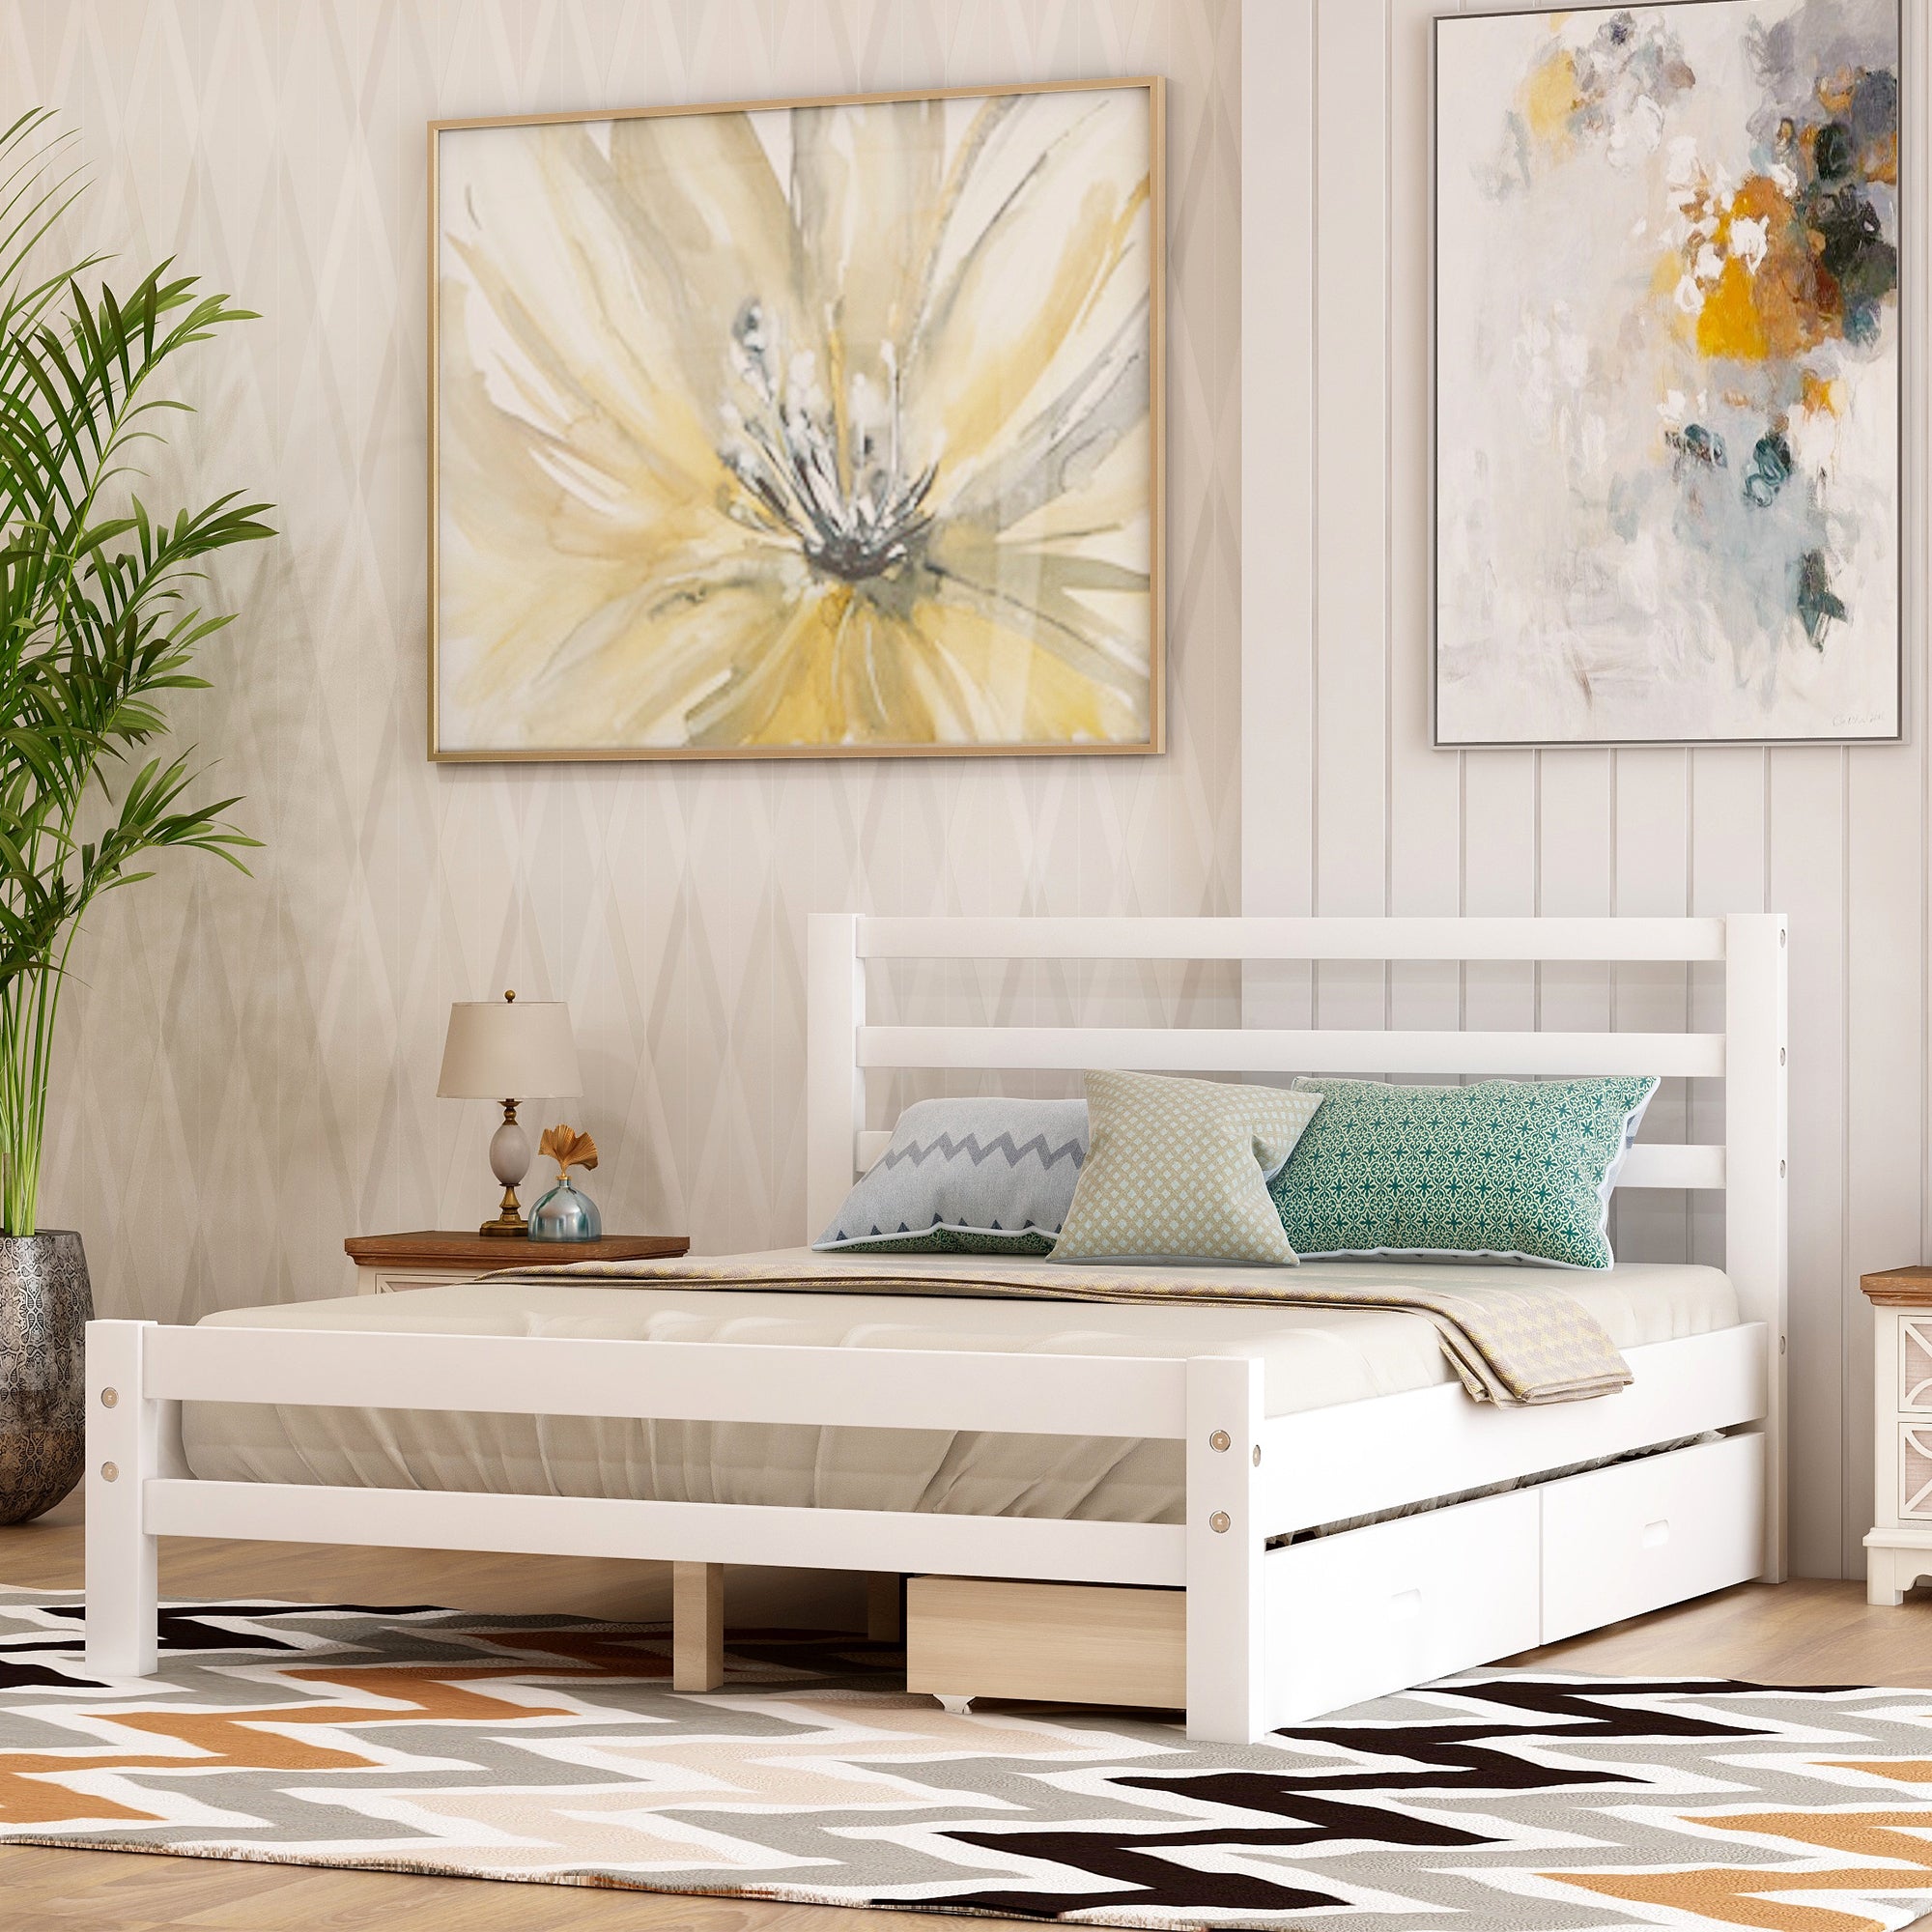 Full-Size Wood Platform Bed with Two Drawers in White by: Alabama Beds